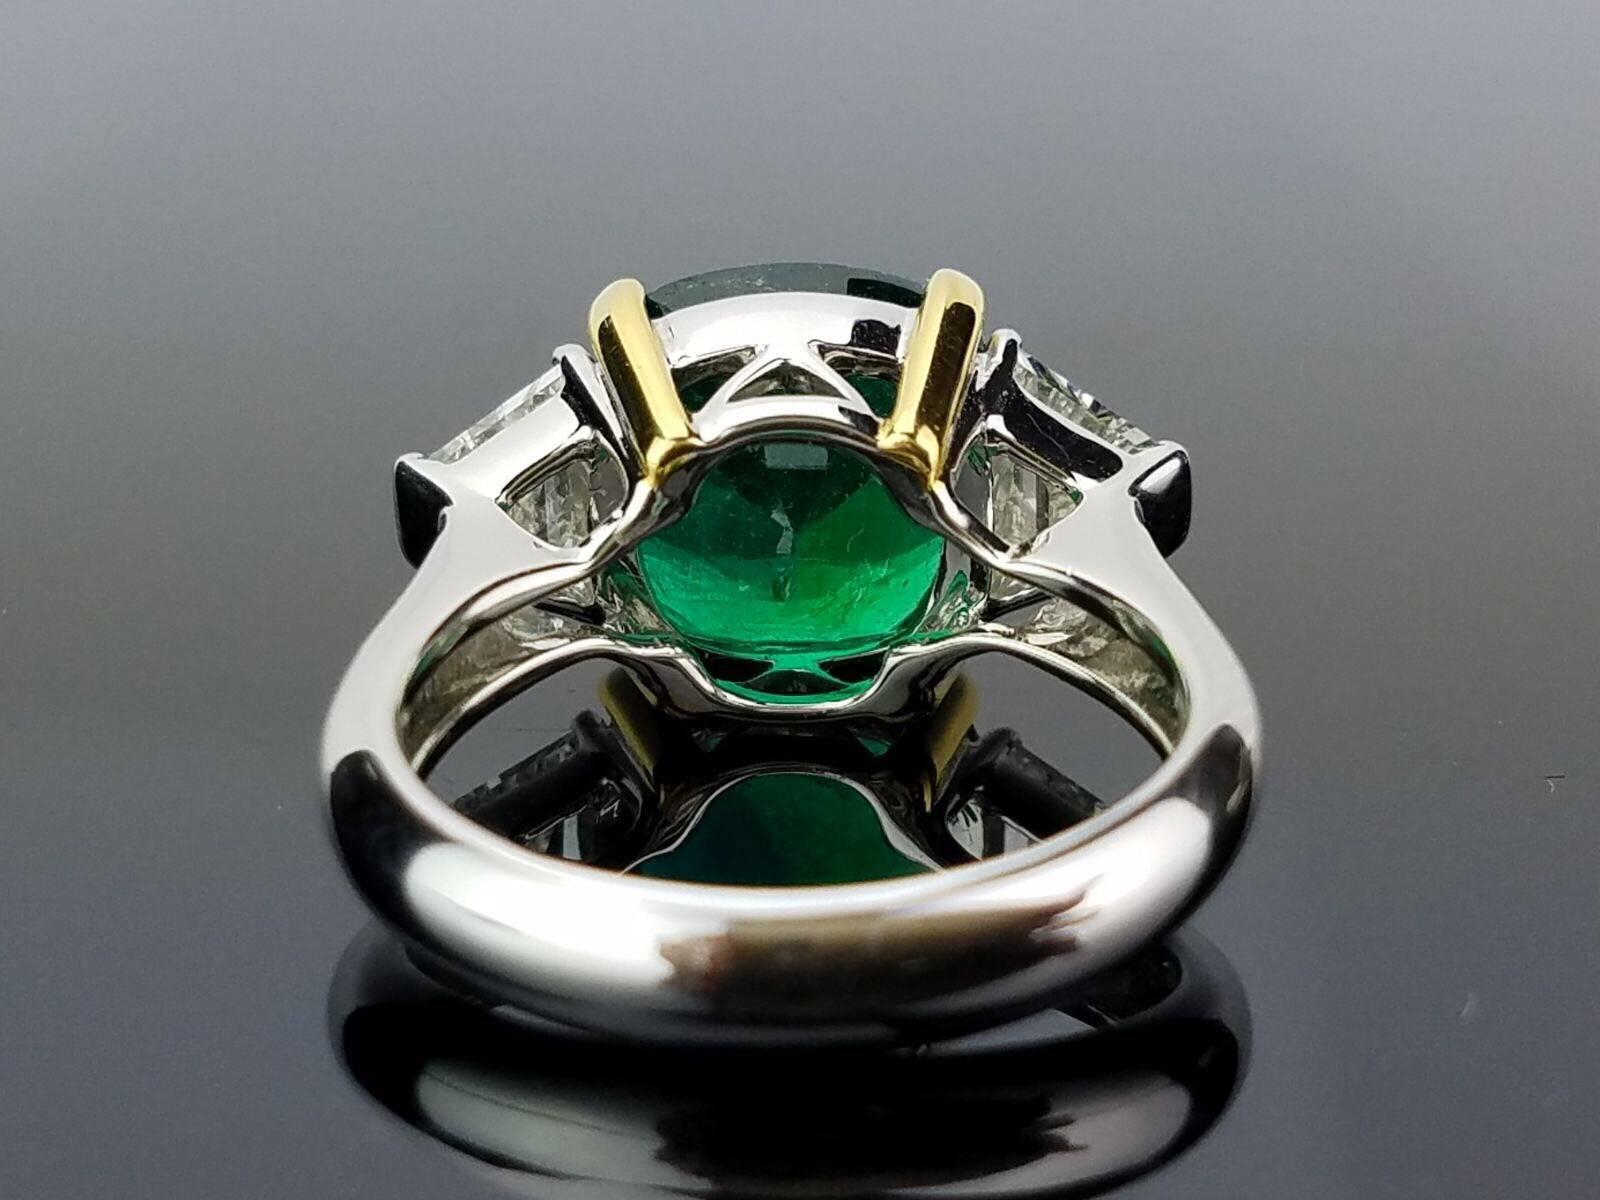 A classic design of a very high-quality, transparent cushion-shaped Zambian Emerald with trapeze White Diamond side stones, all set in 18K white gold. 

Stone Details: 
Stone: Zambian Emerald
Cut: Cushion
Carat Weight: 5.46 Carat

Diamond